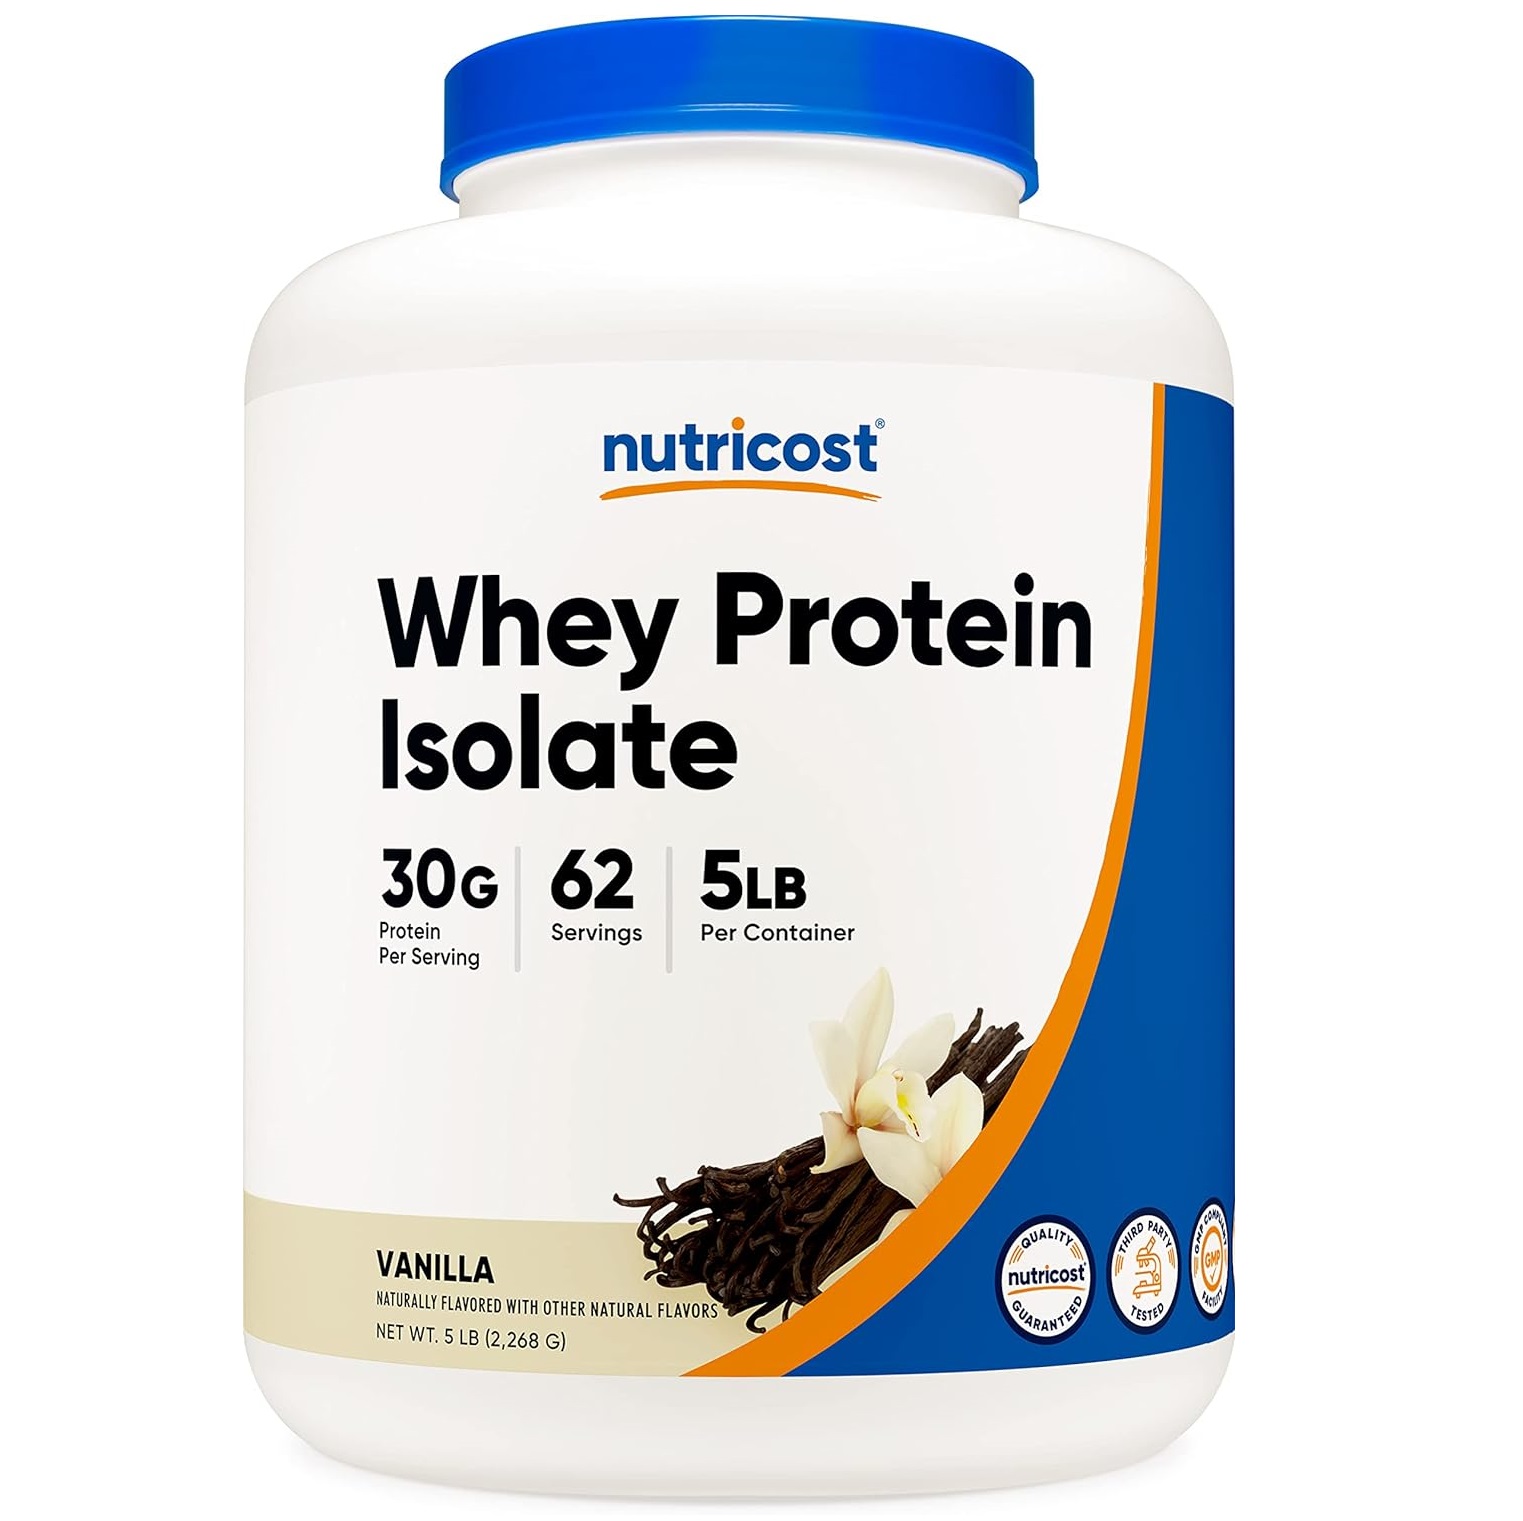 Nutricost-Isolate-Whey-Protein-Supplement-Powder